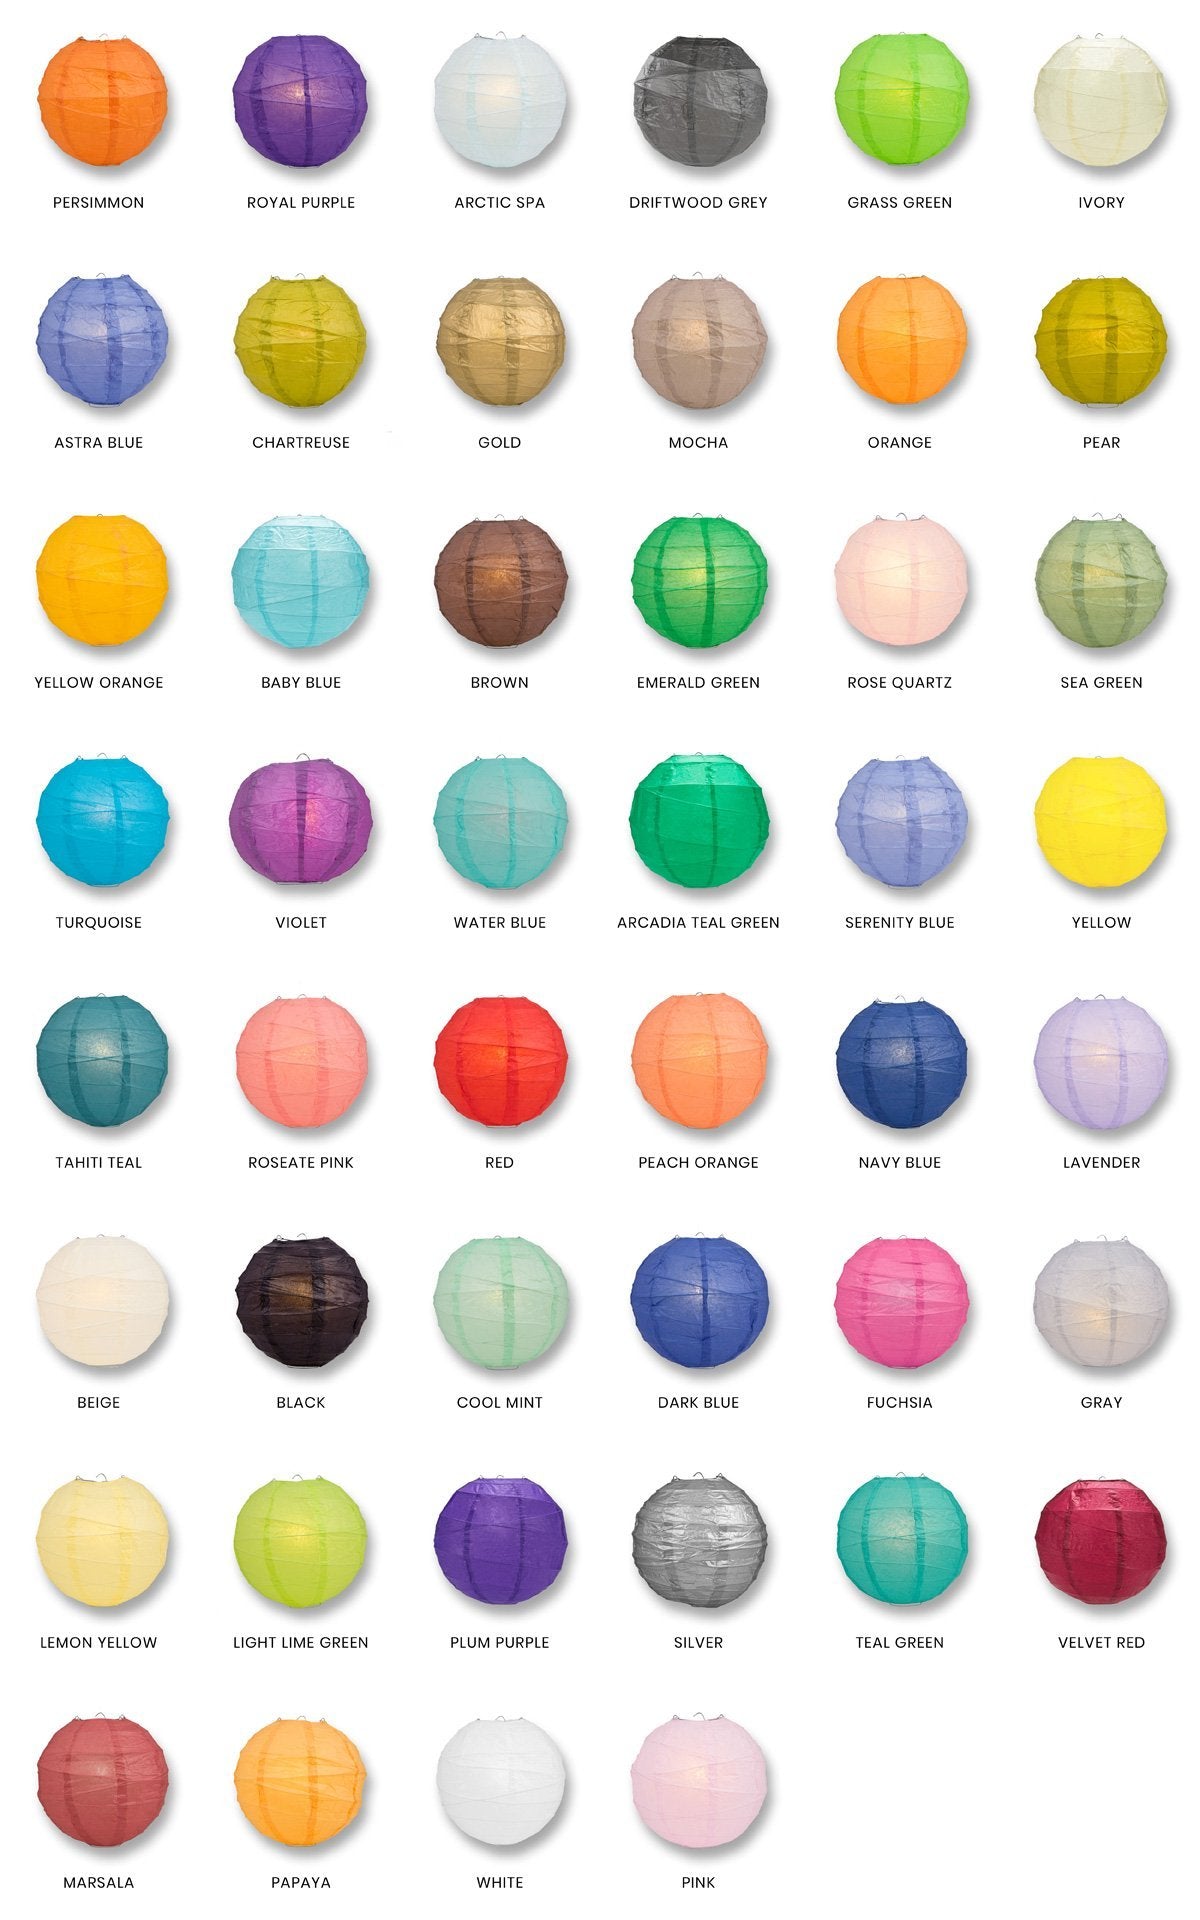 36" Crisscross Ribbing Paper Lanterns - Door-2-Door - Various Colors Available (30-Pieces Master Case, 60-Day Processing)